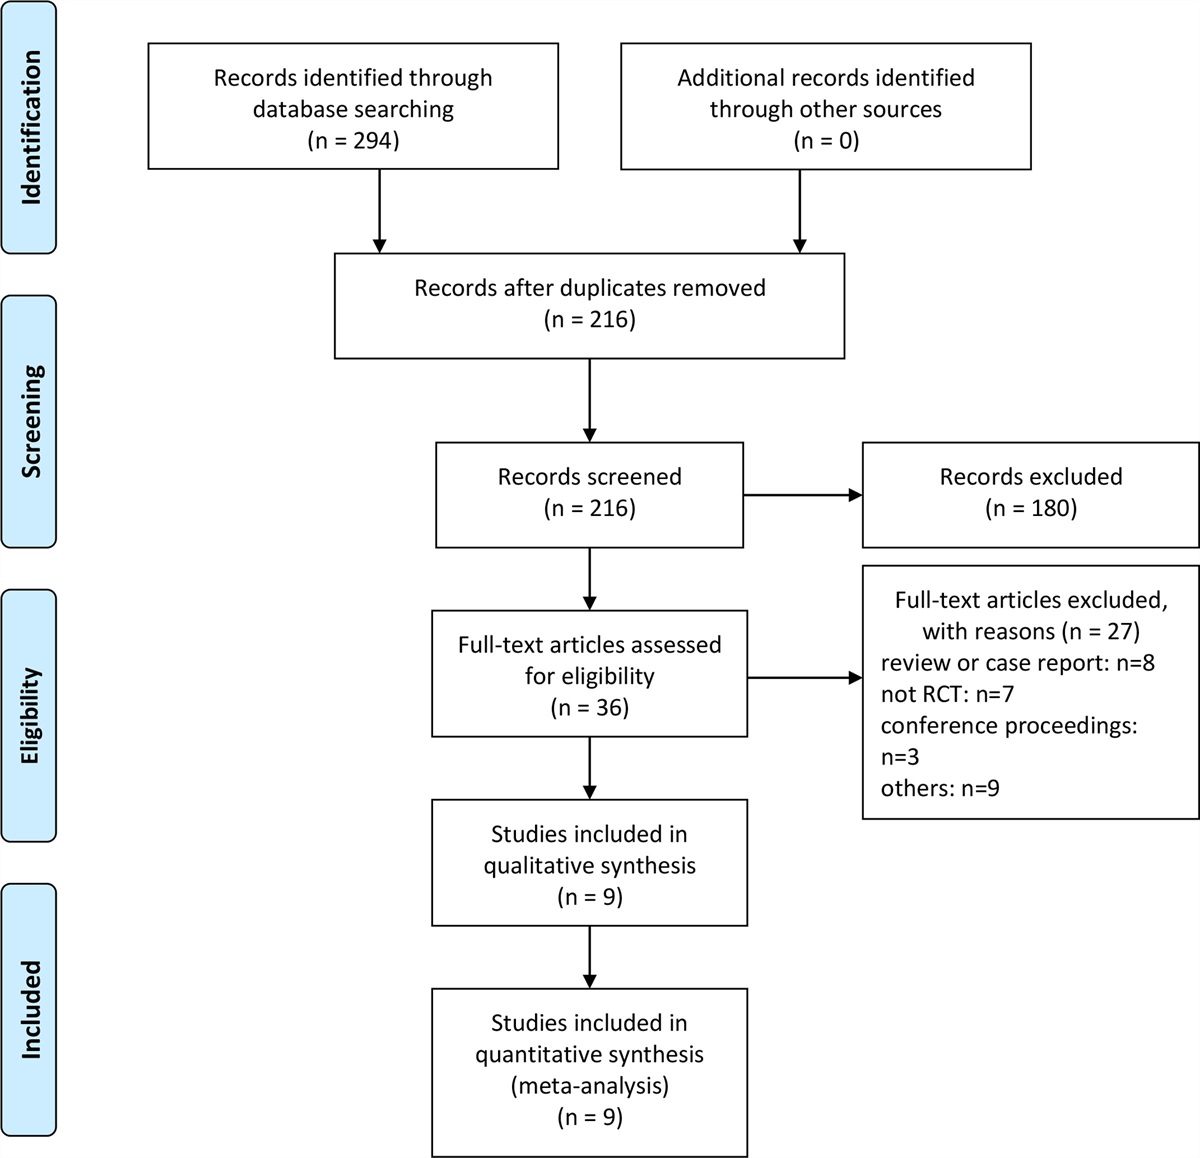 Efficacy and Safety of AbobotulinumtoxinA for Treatment of Moderate-to-Severe Glabellar Lines: A Meta-Analysis